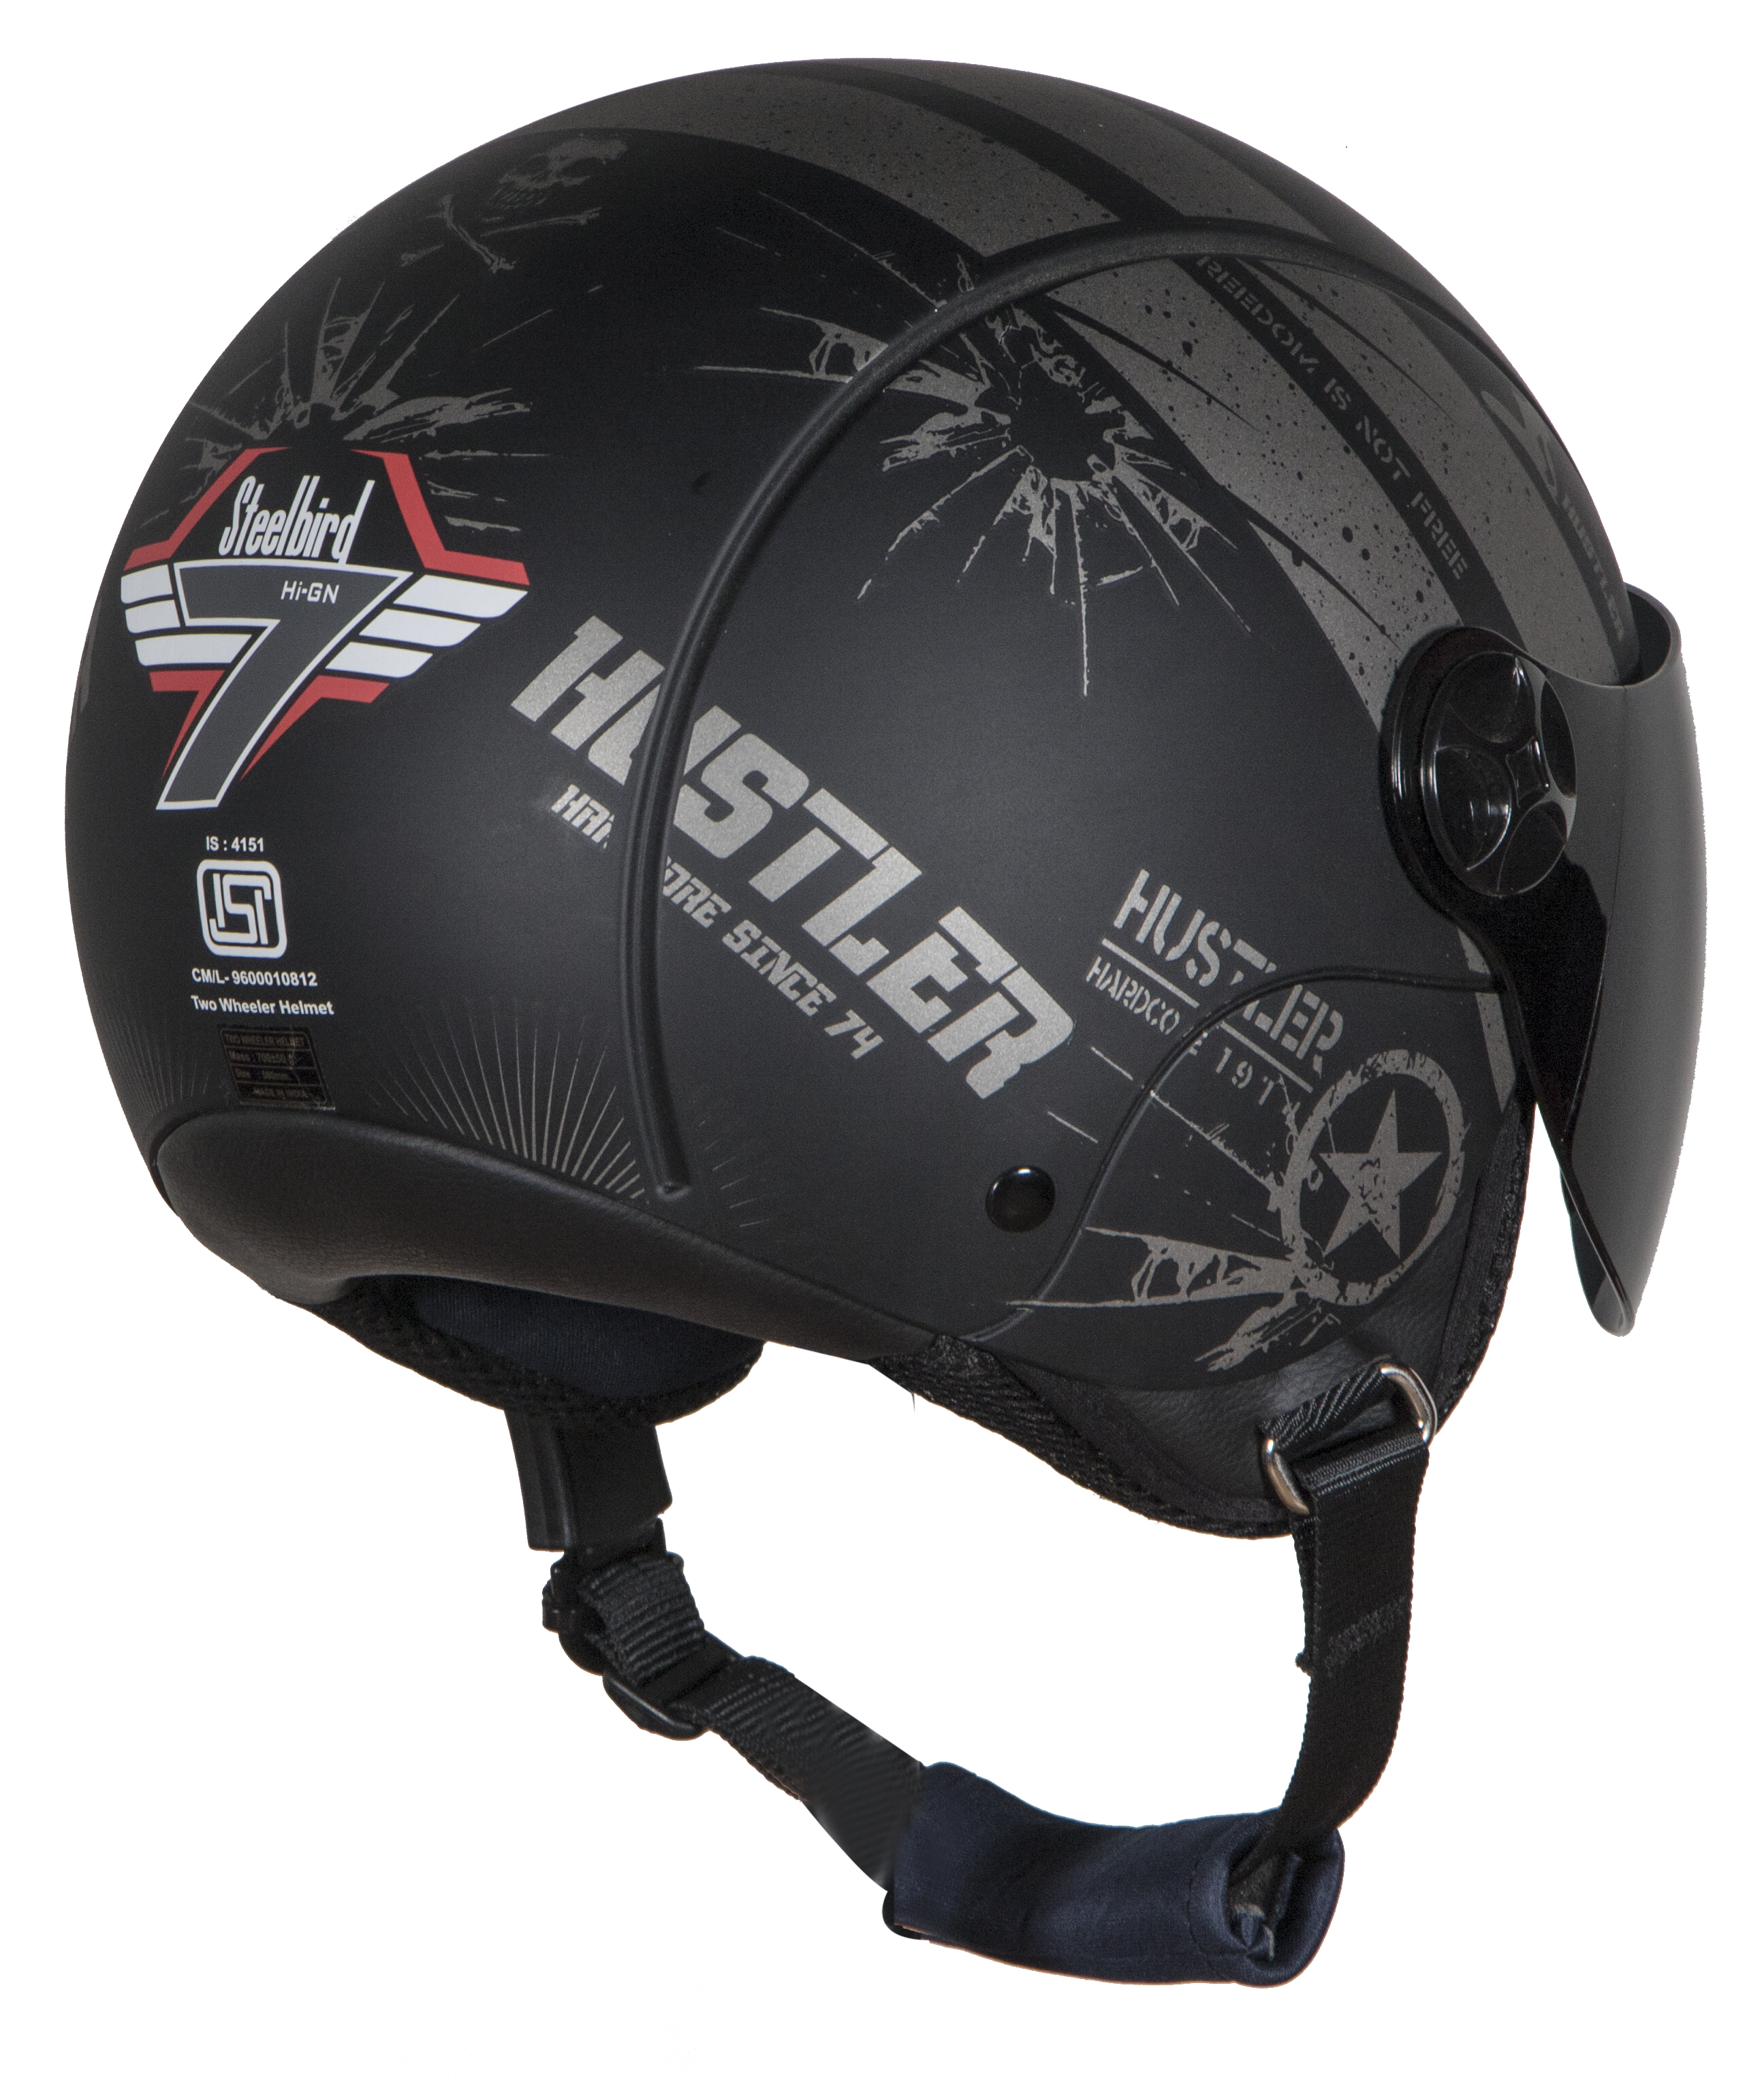 SBH-16 Hustler Mat Black With Grey( Fitted With Clear Visor Extra Smoke Visor Free)